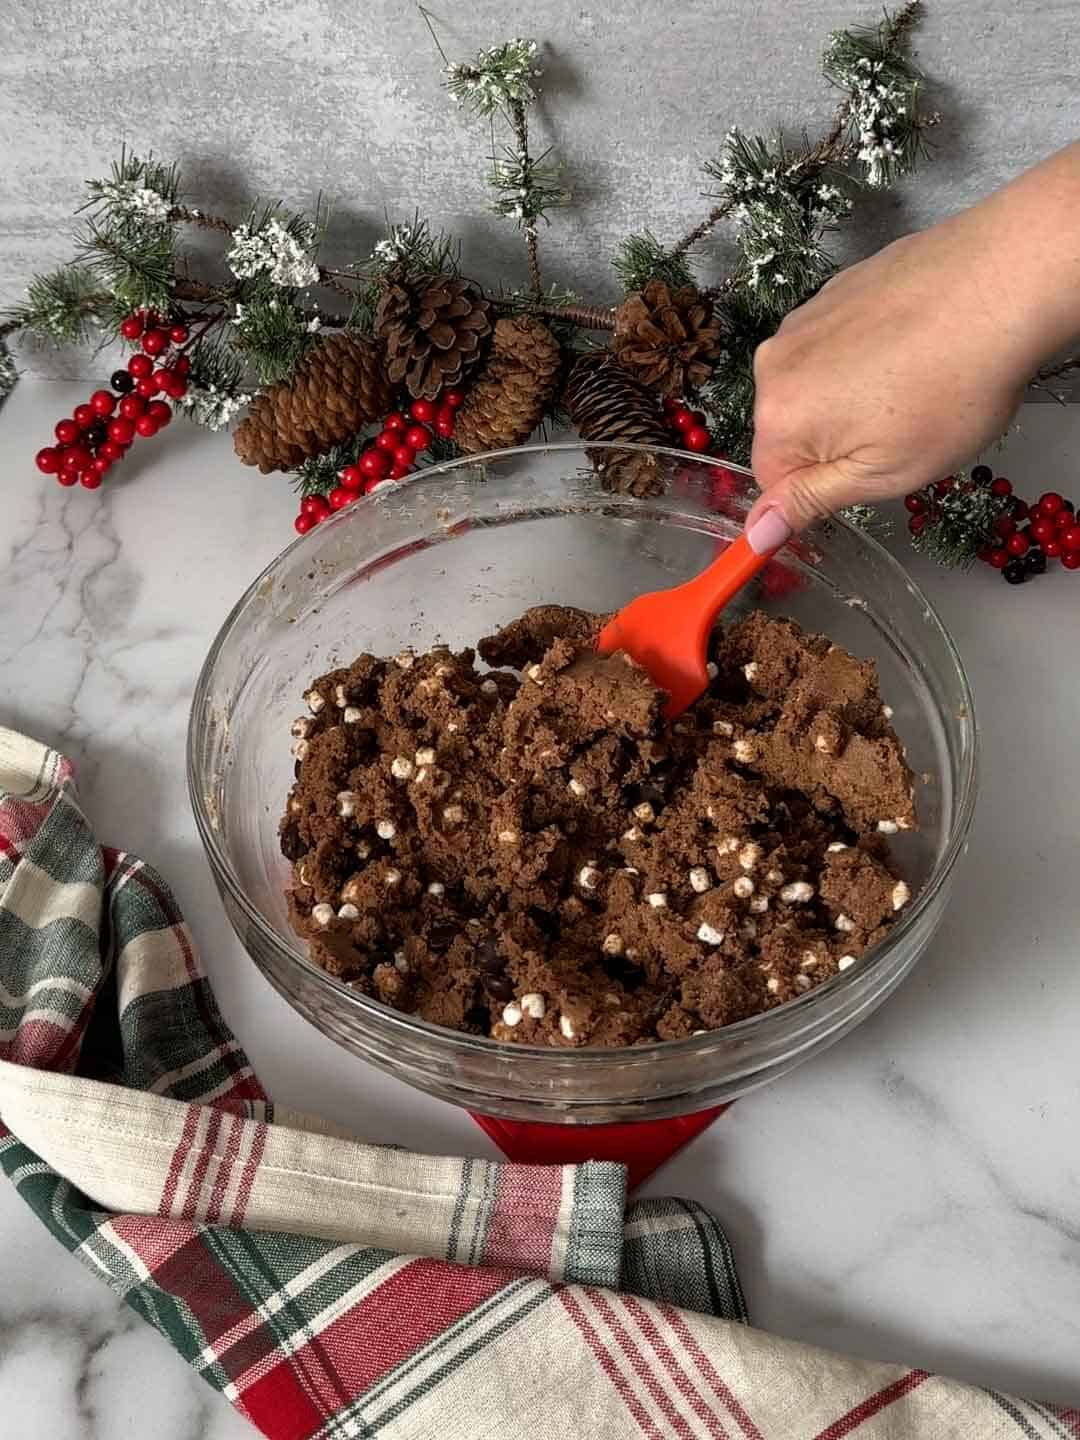 Stirring chocolate chips and marshmallows into the cookie dough